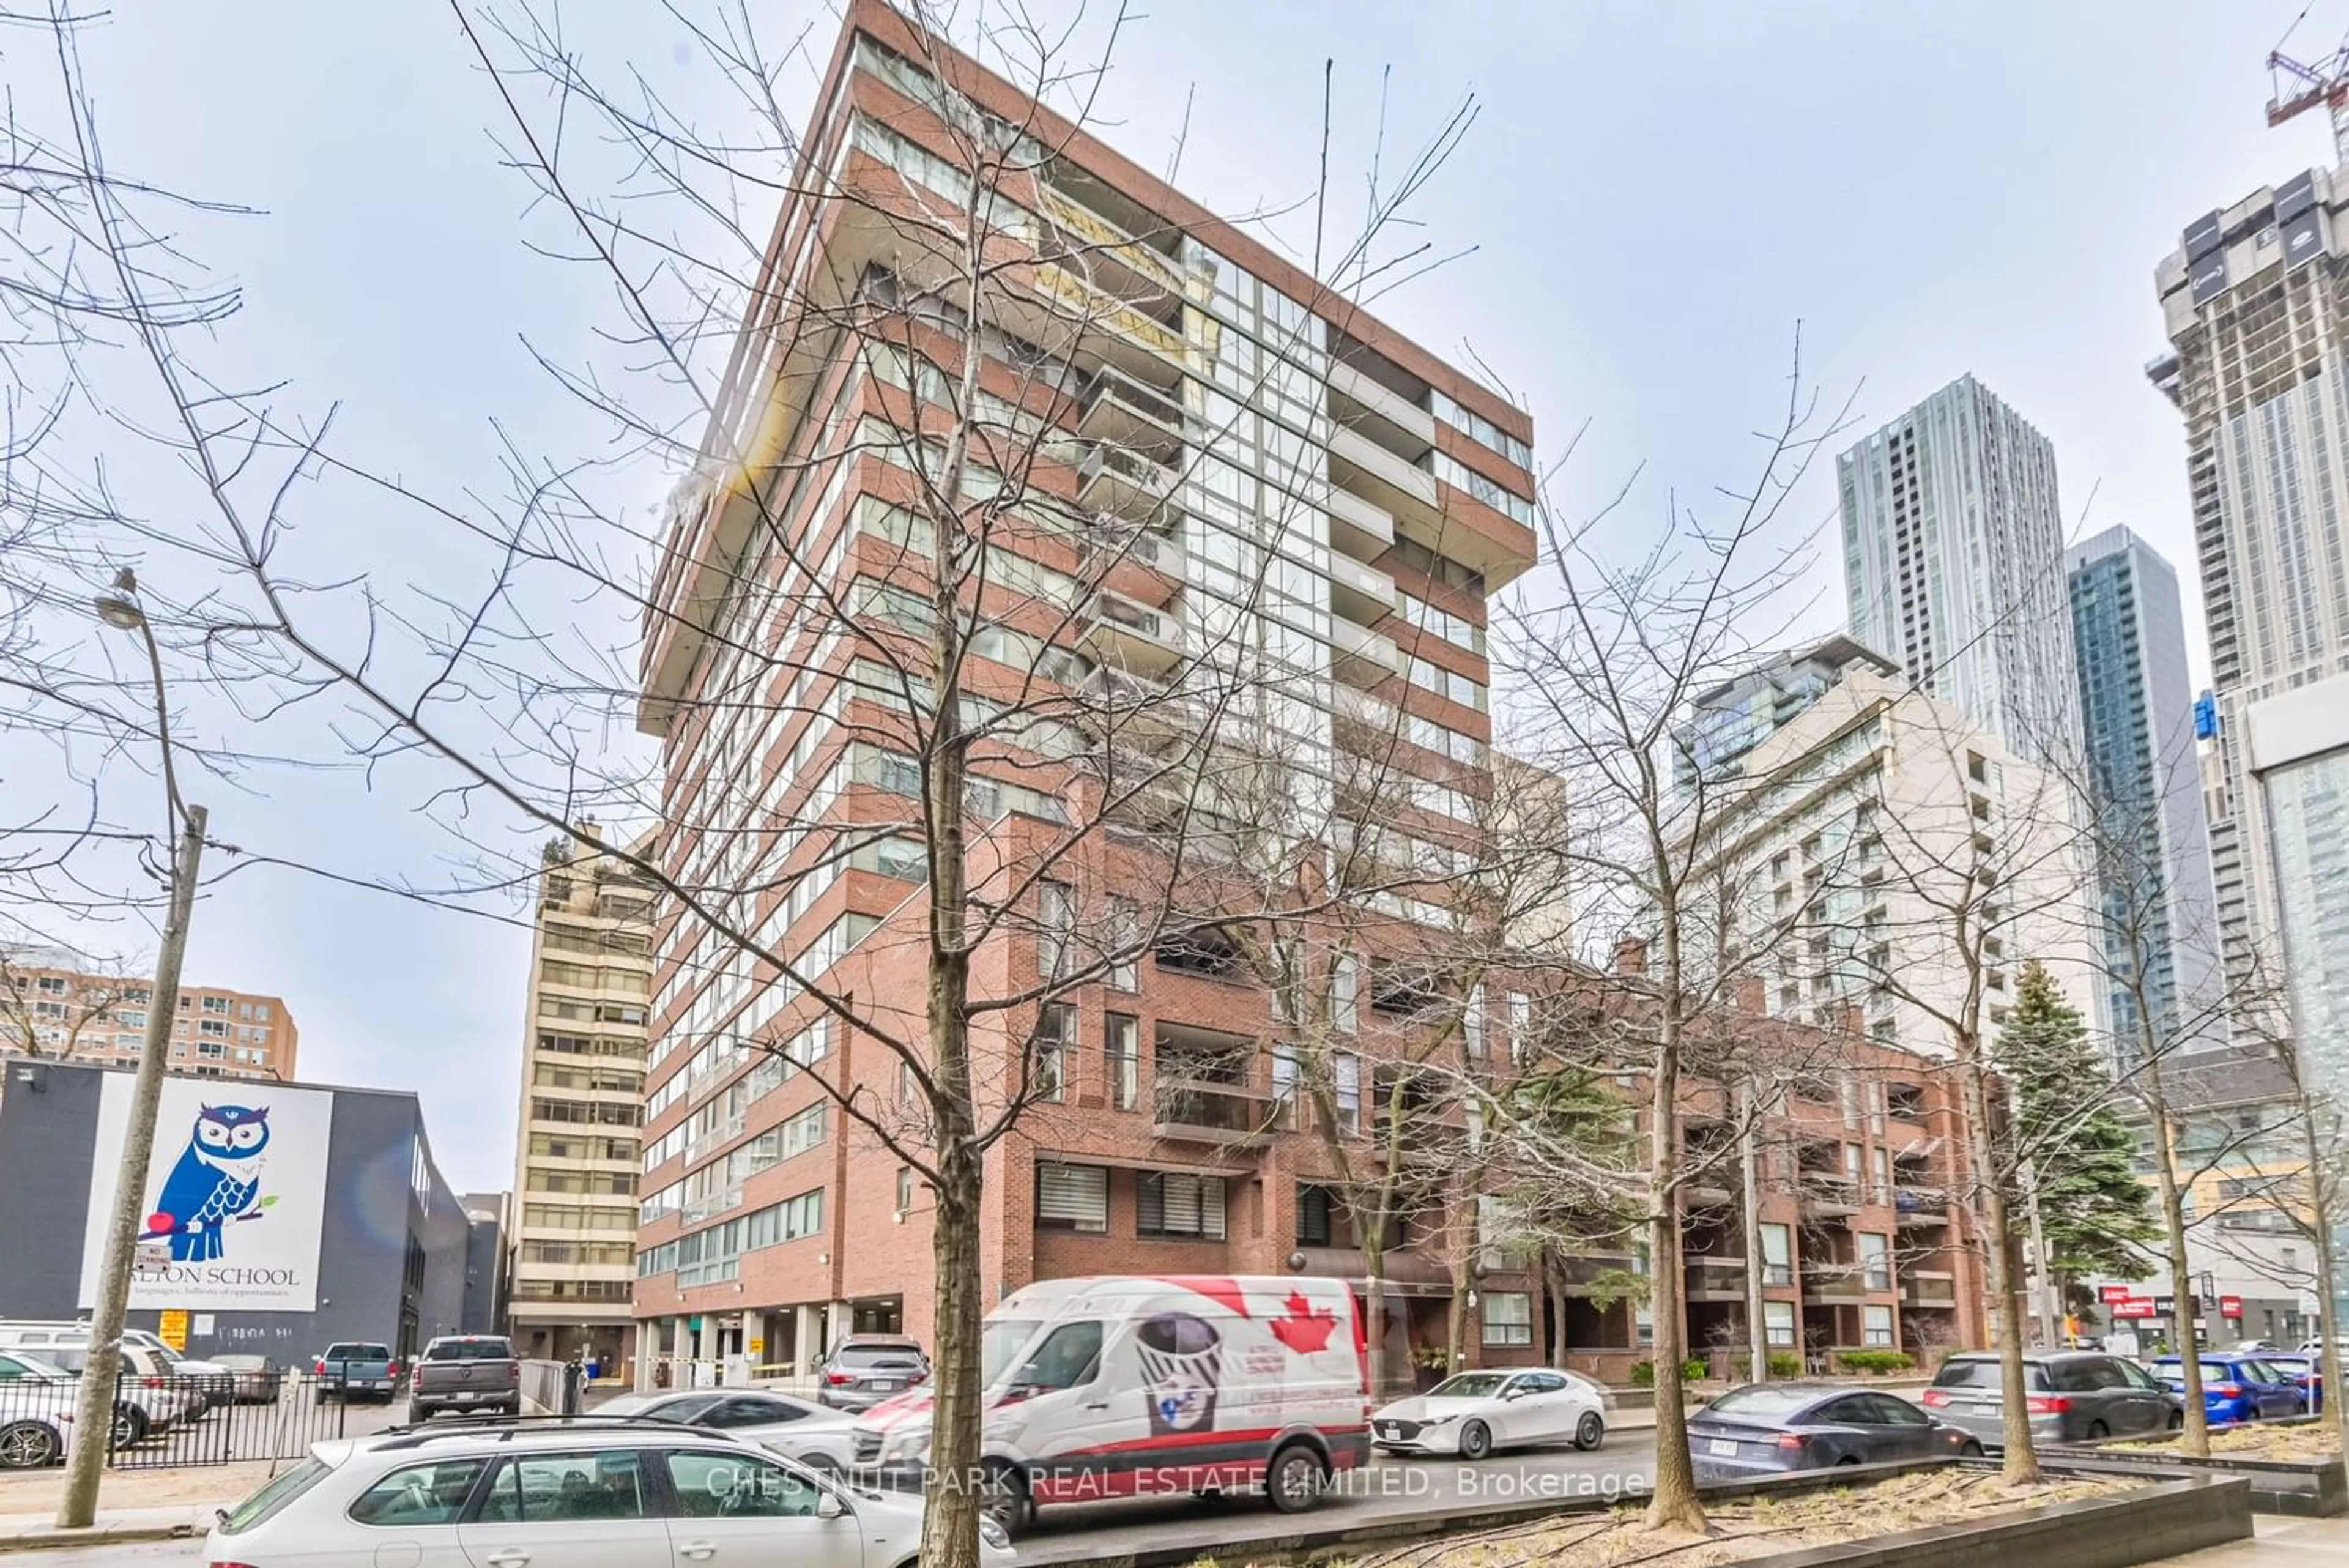 A pic from exterior of the house or condo for 15 Mcmurrich St #1502, Toronto Ontario M5R 3M6